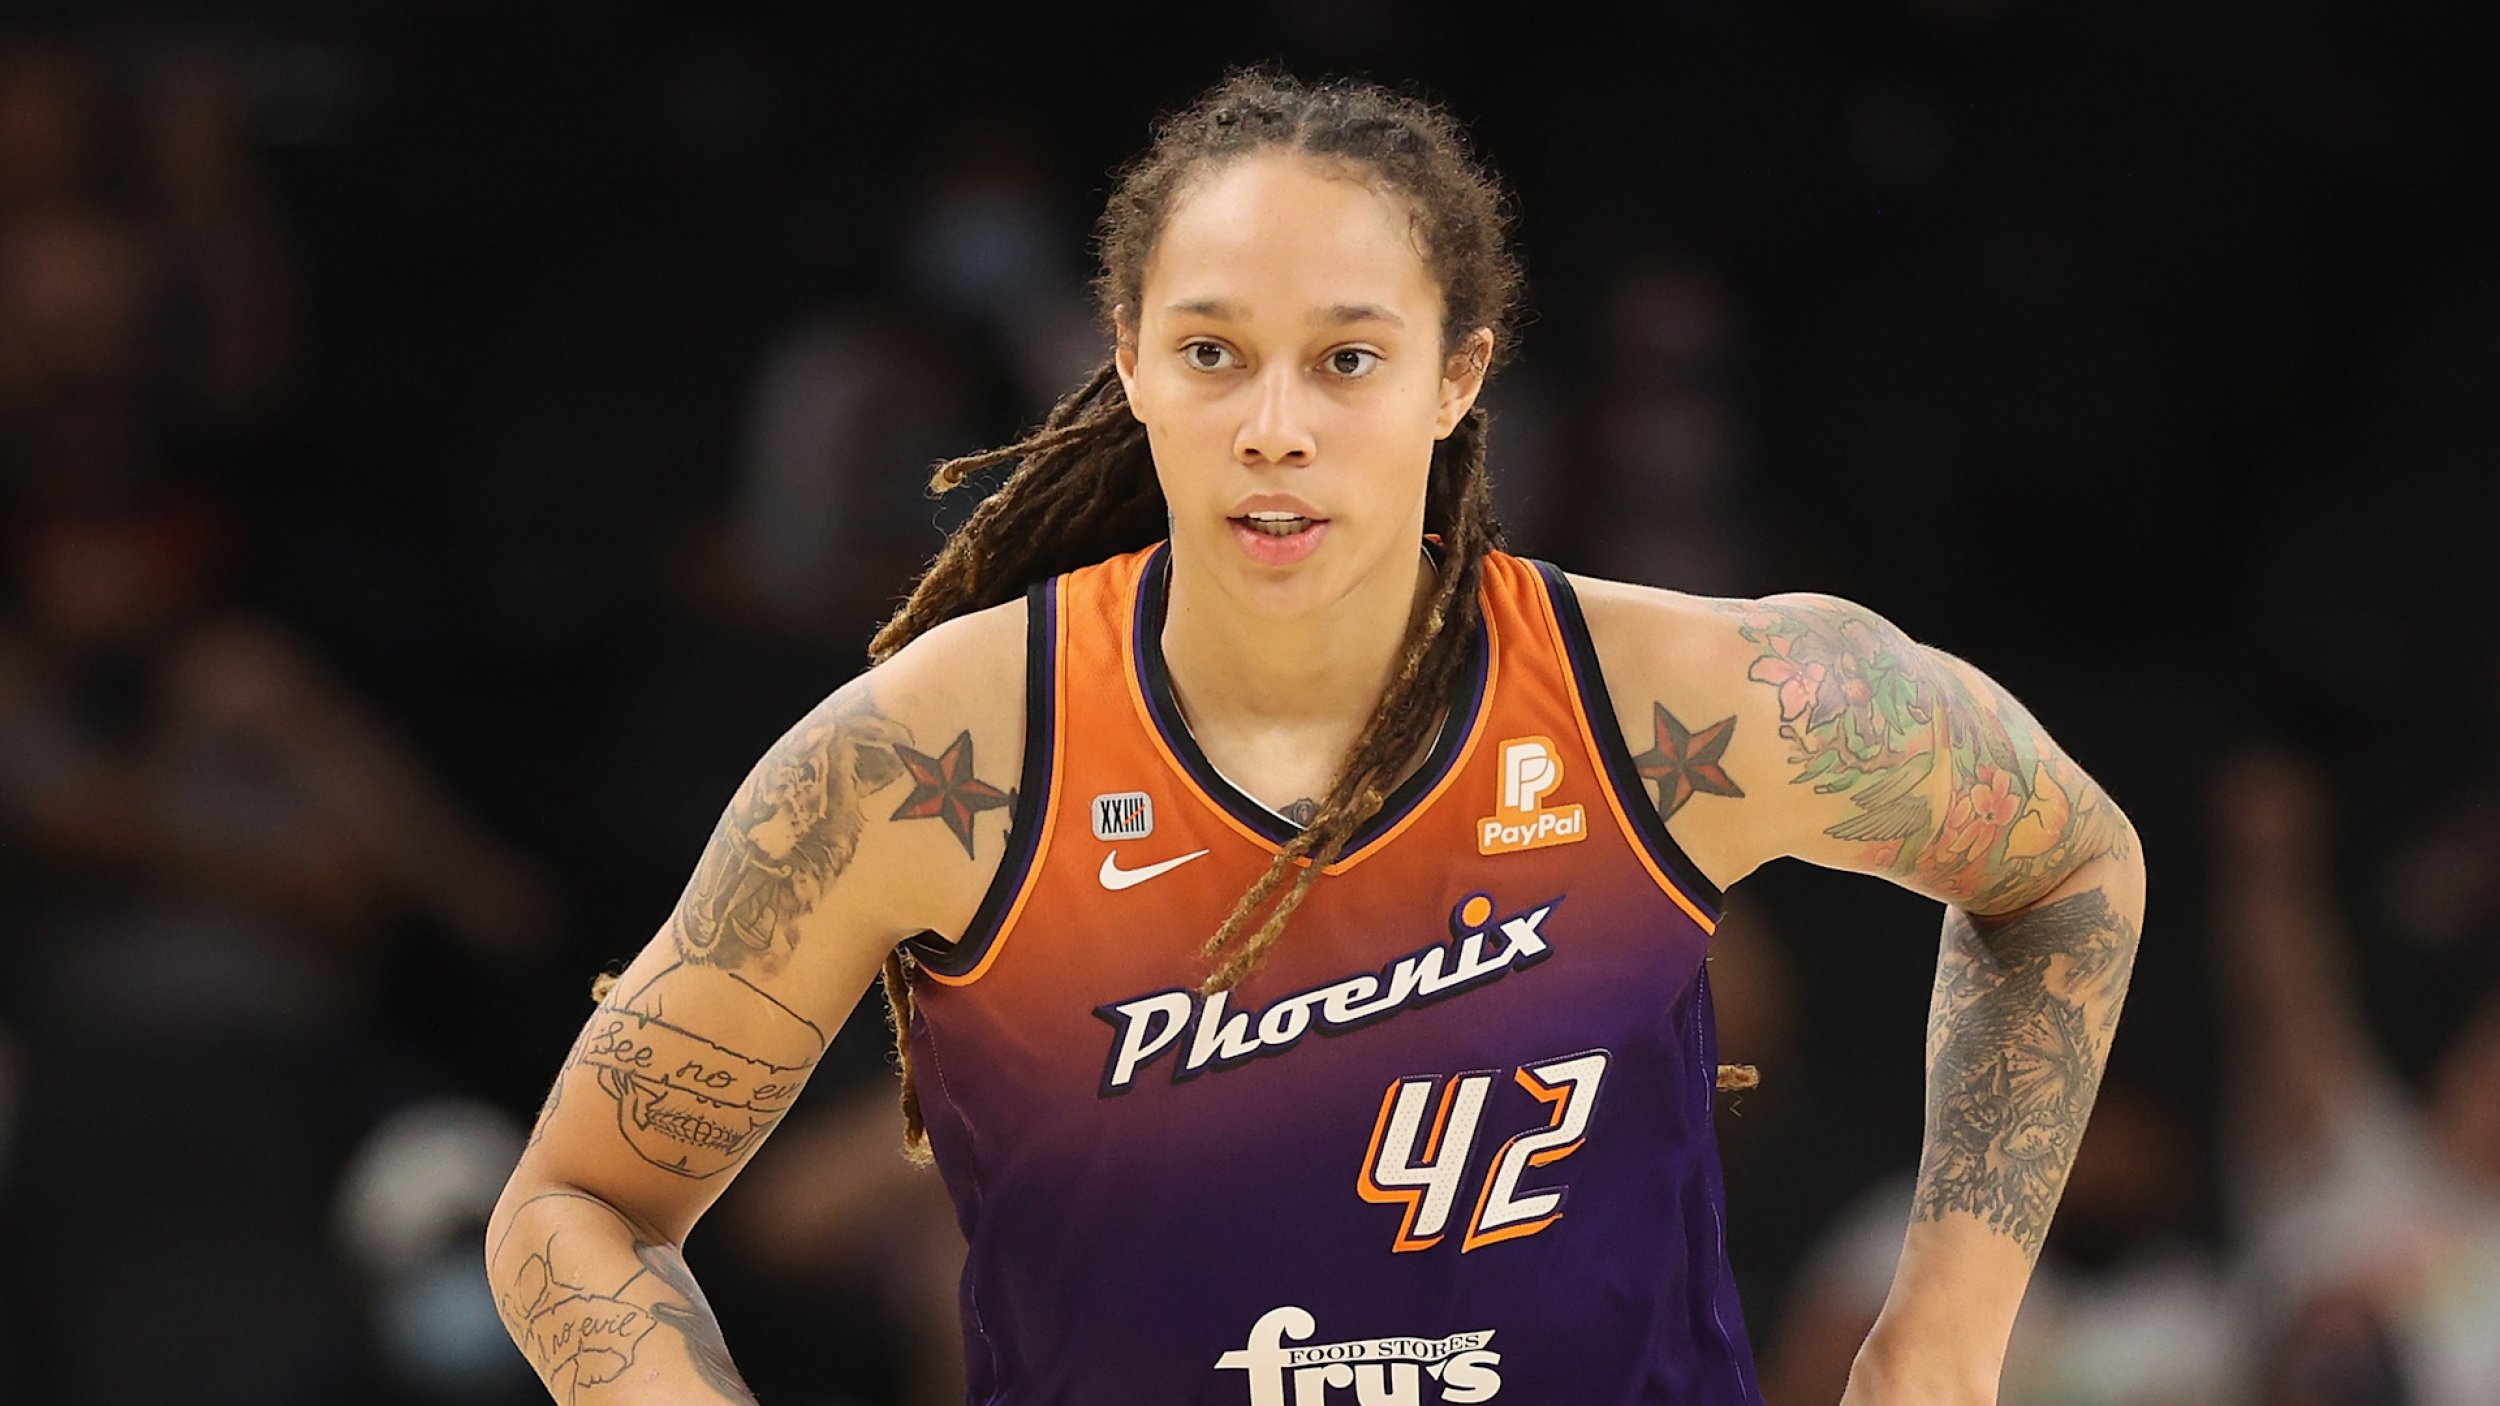 Griner a WNBA Player has Pleaded Guilty to Drug Charges in Russia